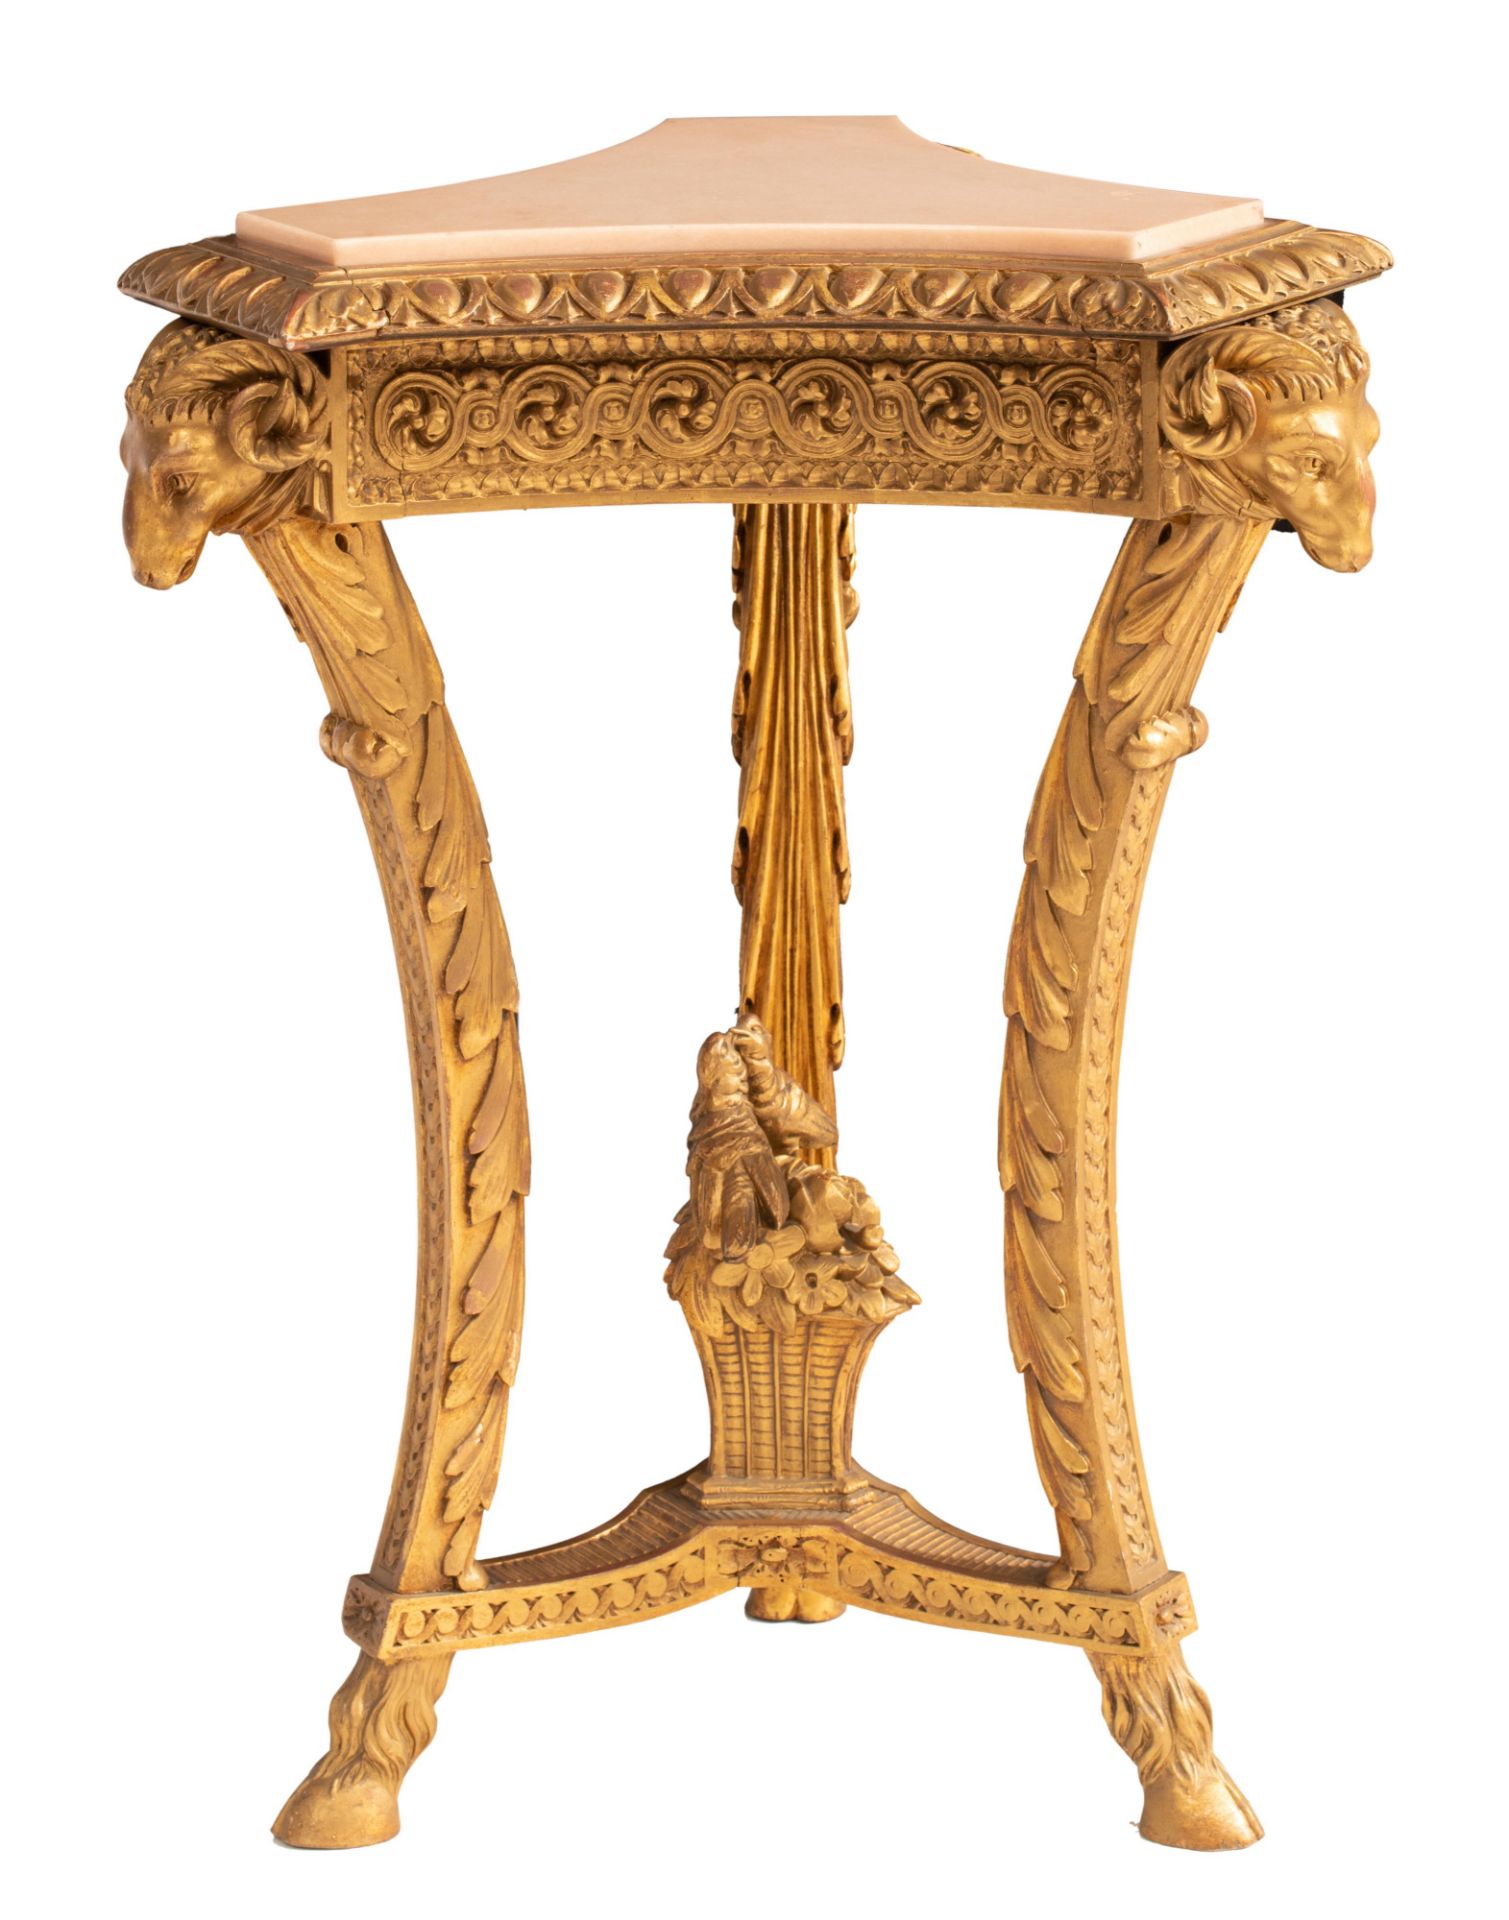 A Louis XVI style carved and giltwood gueridon, H 75 - W 57 - D 53 cm